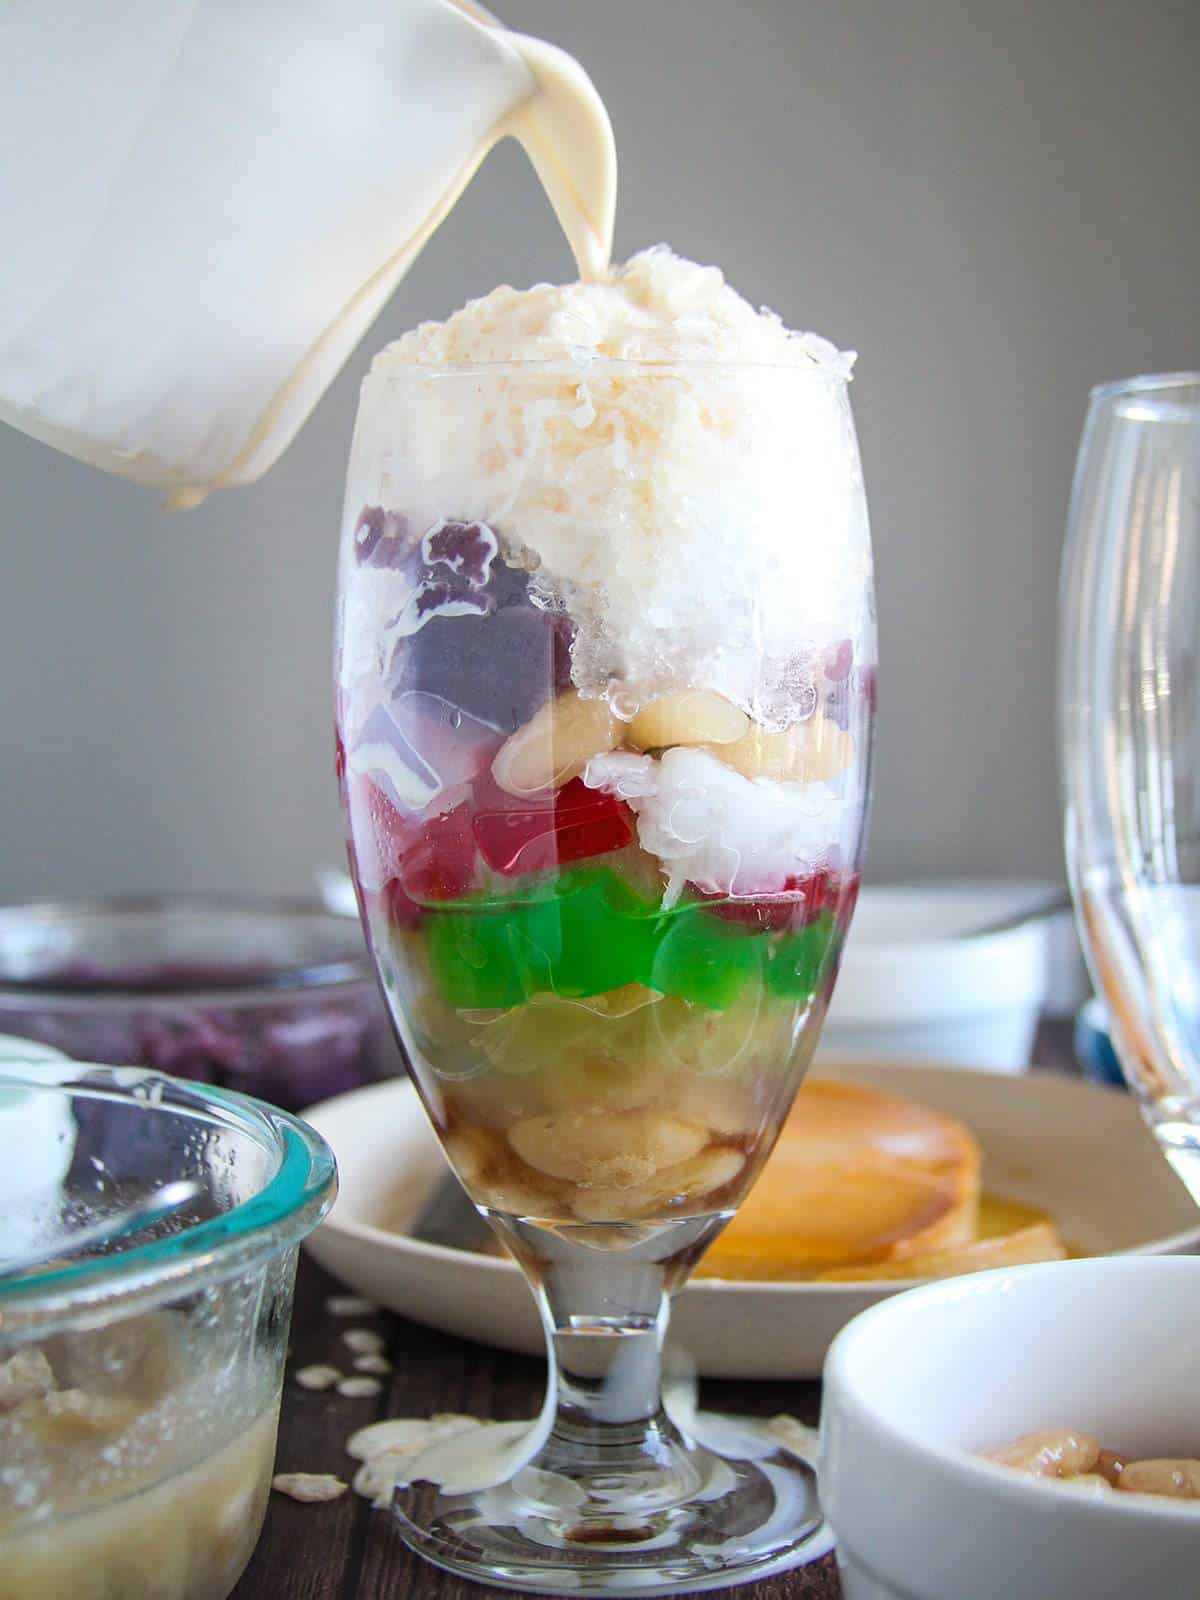 pouring evaporated milk in a glass of halo-halo